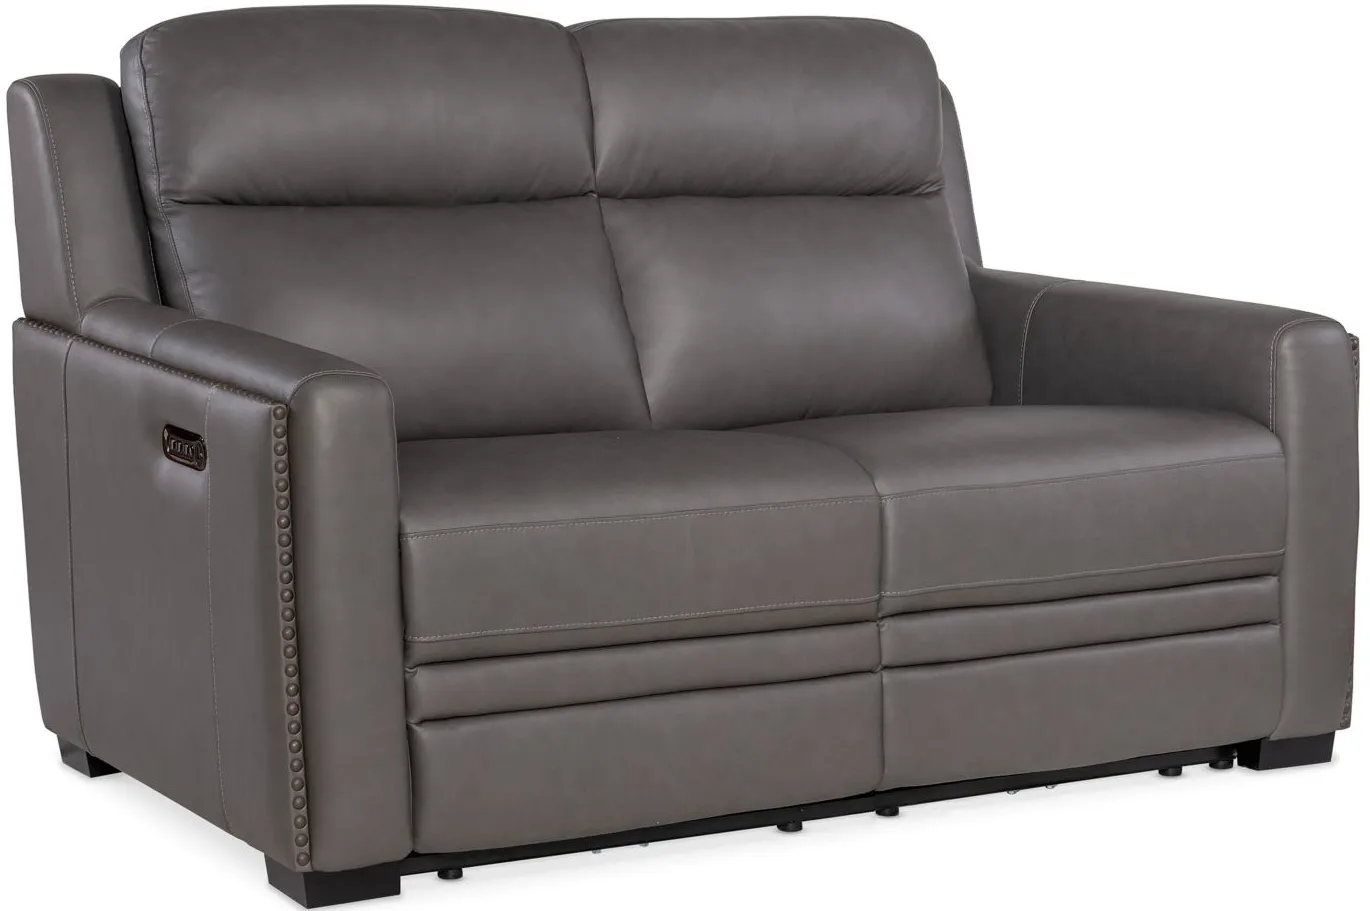 McKinley Power Loveseat with Power Headrest & Lumbar in Candid Shale by Hooker Furniture